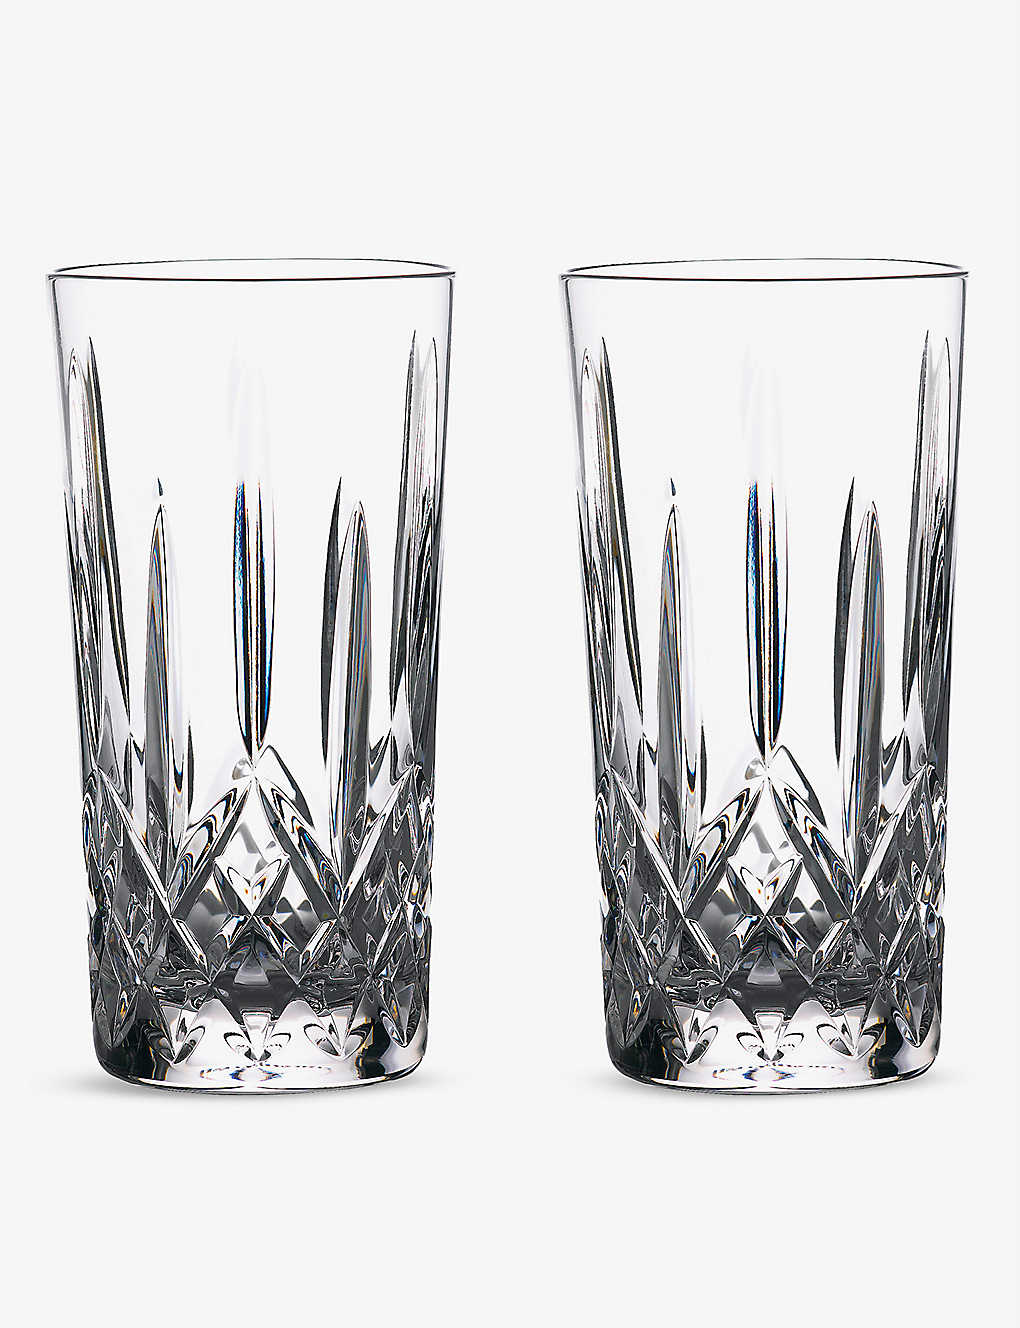 WATERFORD ジン ジャーニー リズモー クリスタル ハイボールグラス 2個セット Gin Journey Lismore crystal HiBall glasses set of two